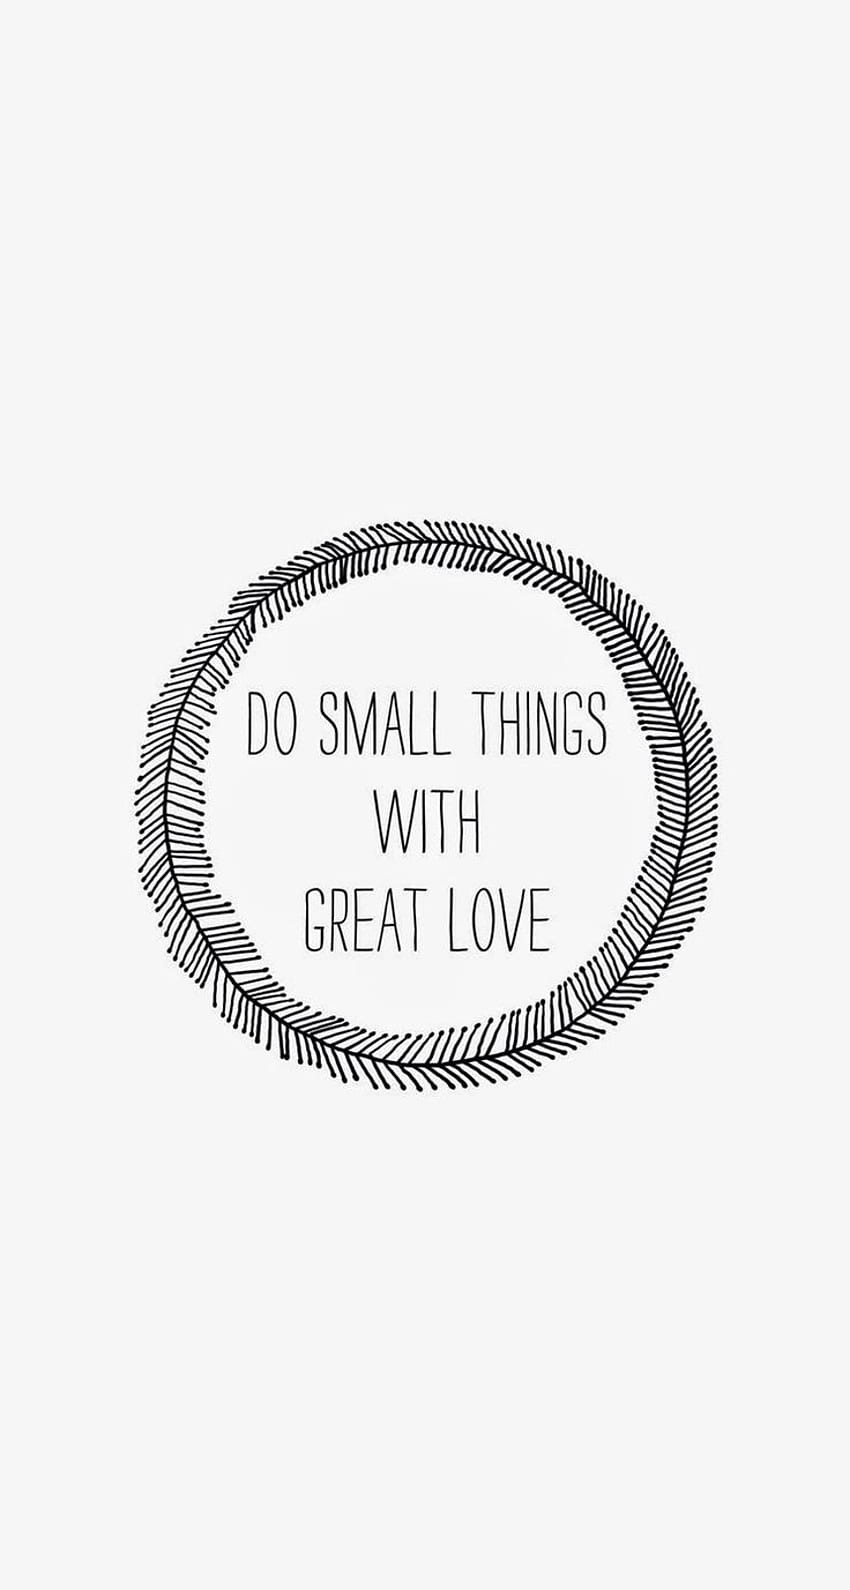 This small things. Картинки для сторис фон. Do small things with great Love Постер. Do small things with great Love. Small things.